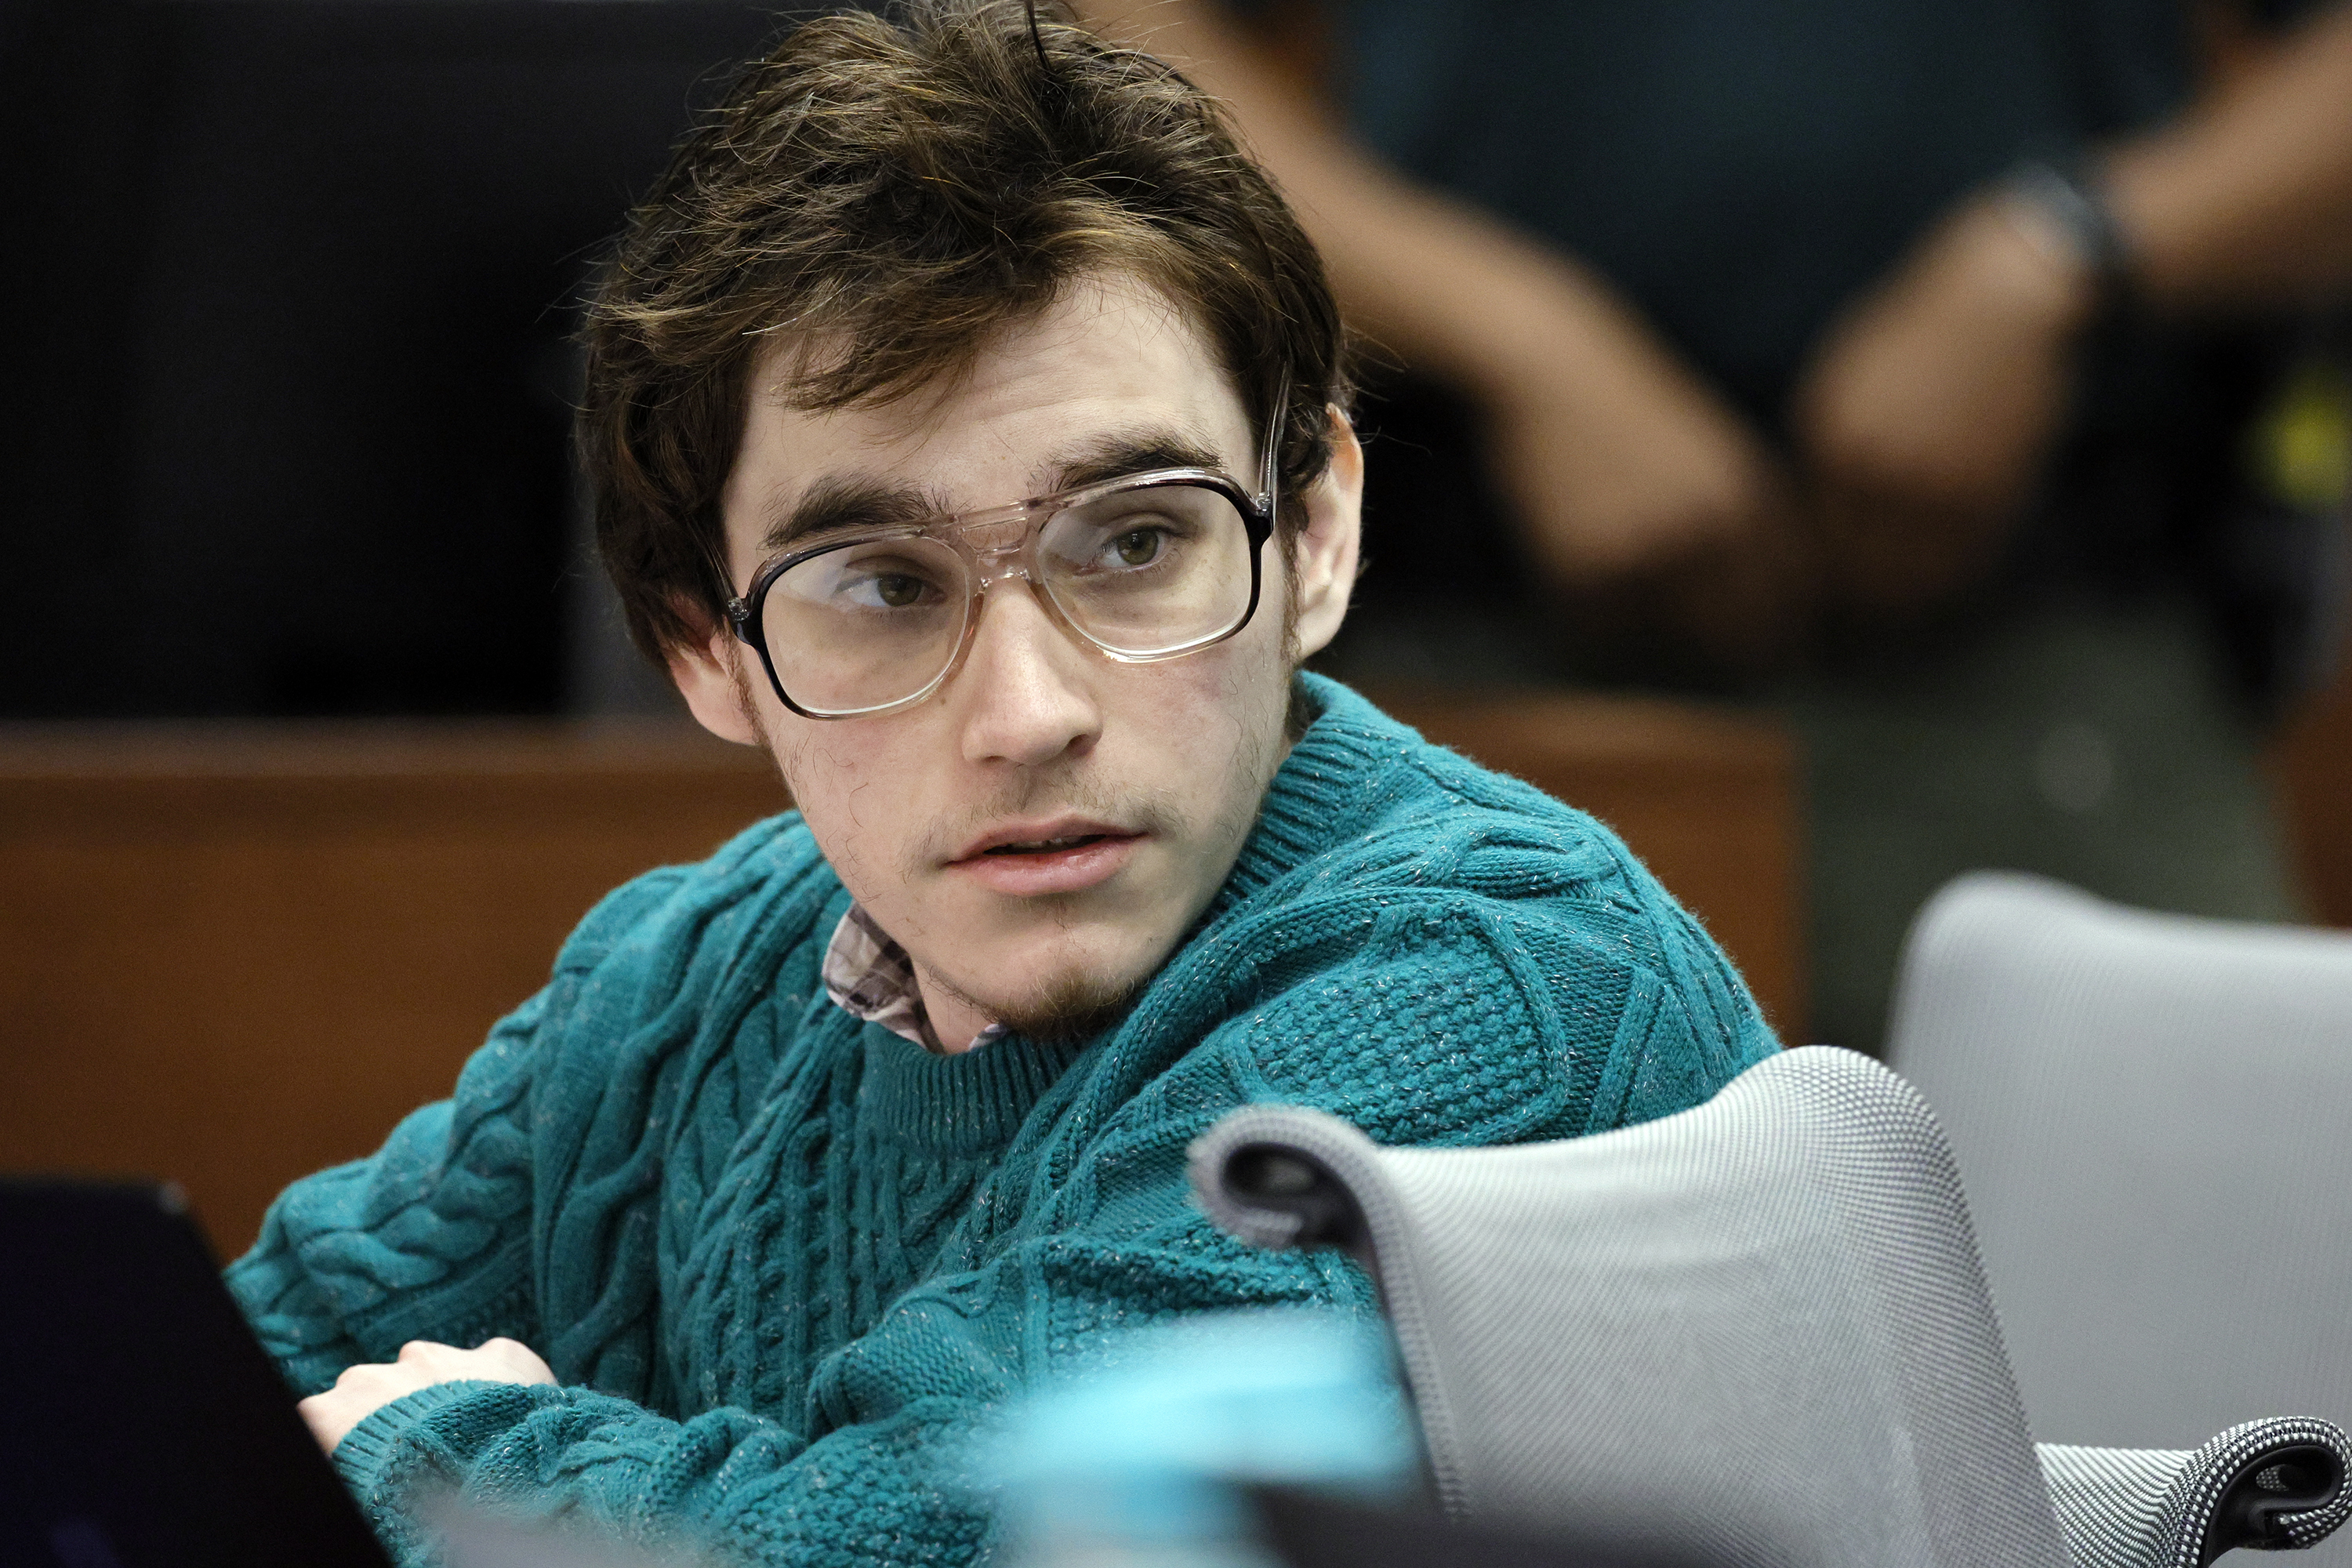 ‘Toughest Job Of My Life’: Potential Jurors Questioned In Second Phase Of Jury Selection Process For Parkland School Shooter Nikolas Cruz Penalty Trial